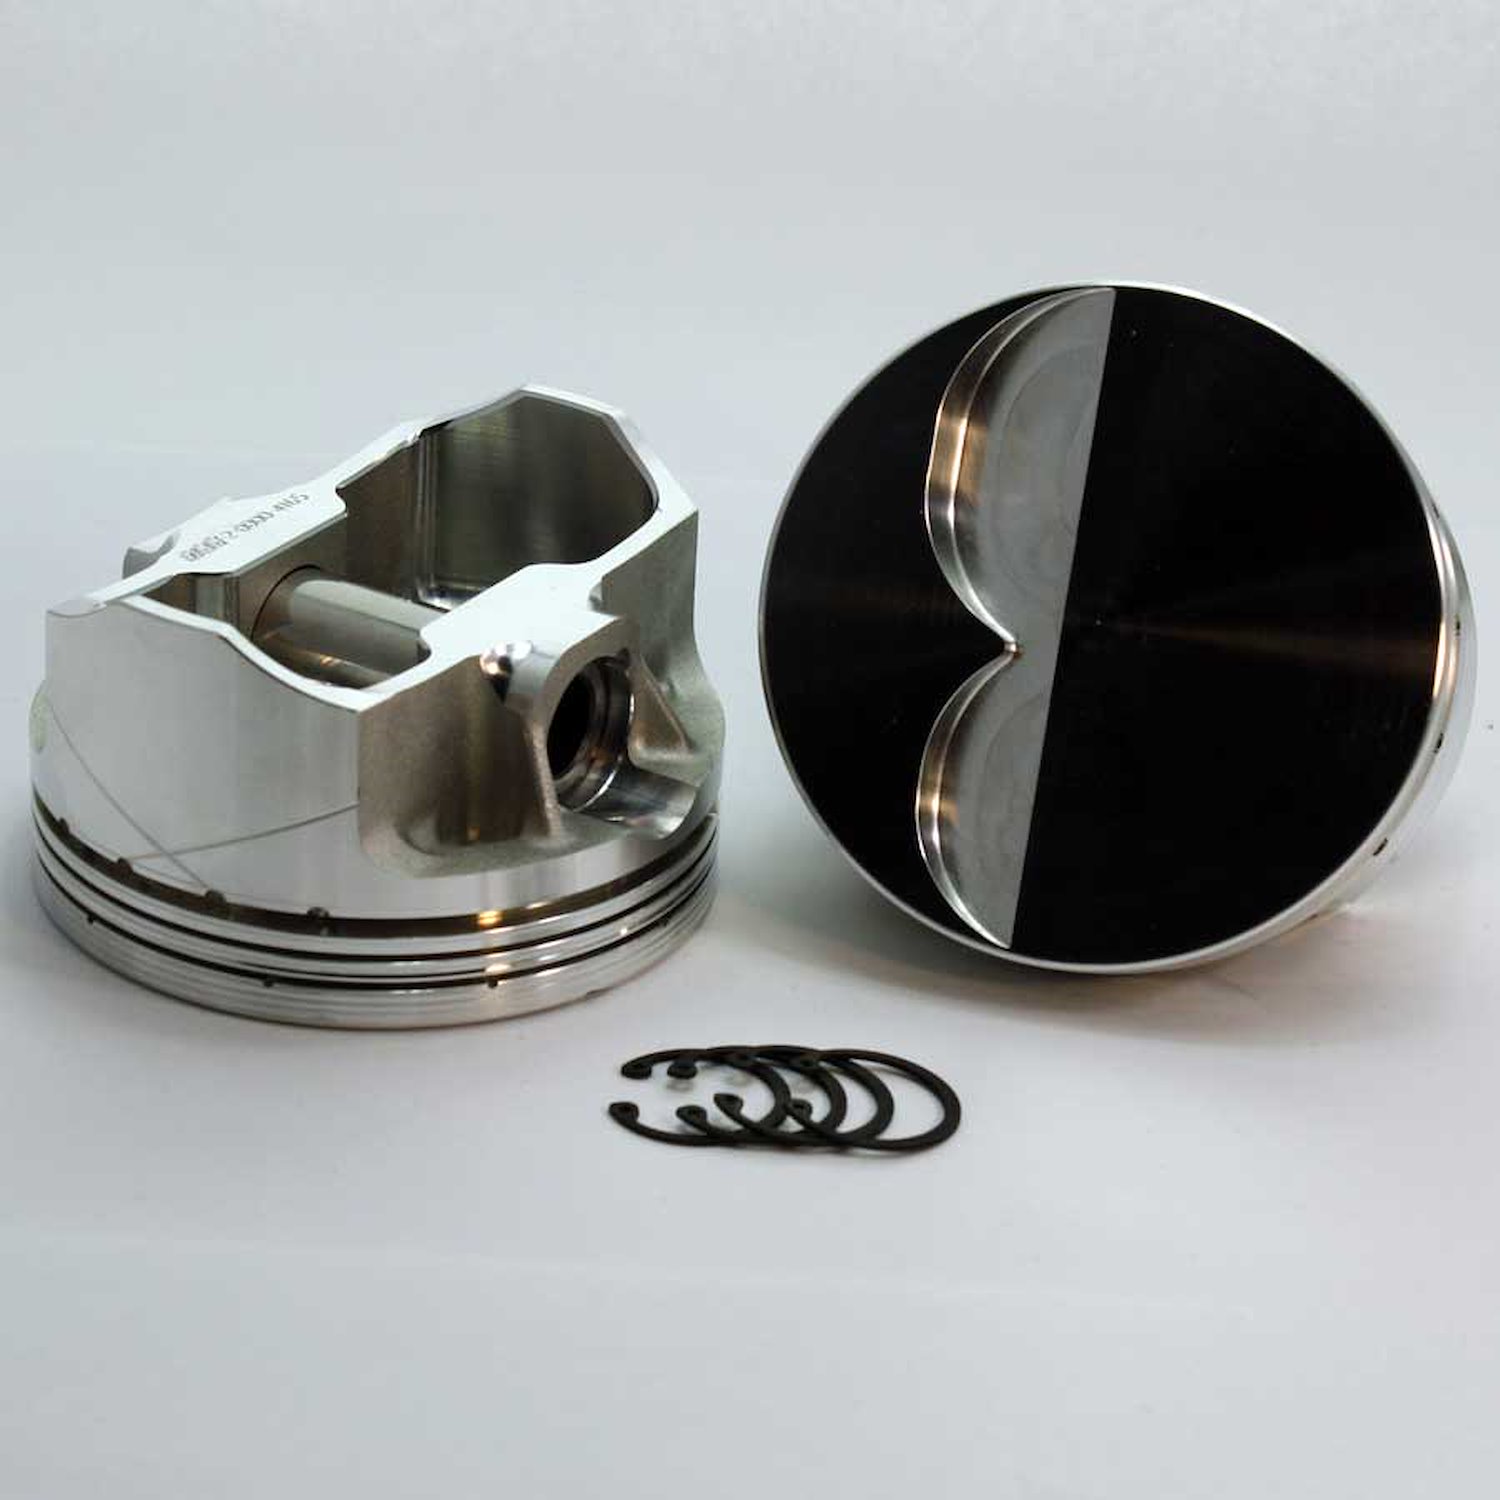 3-3400-4030 FX-Series Flat Top Piston Set for 1962-2001 Small Block Ford 289-302, 4.030 in. Bore, -4cc Volume [OEM Stroke]